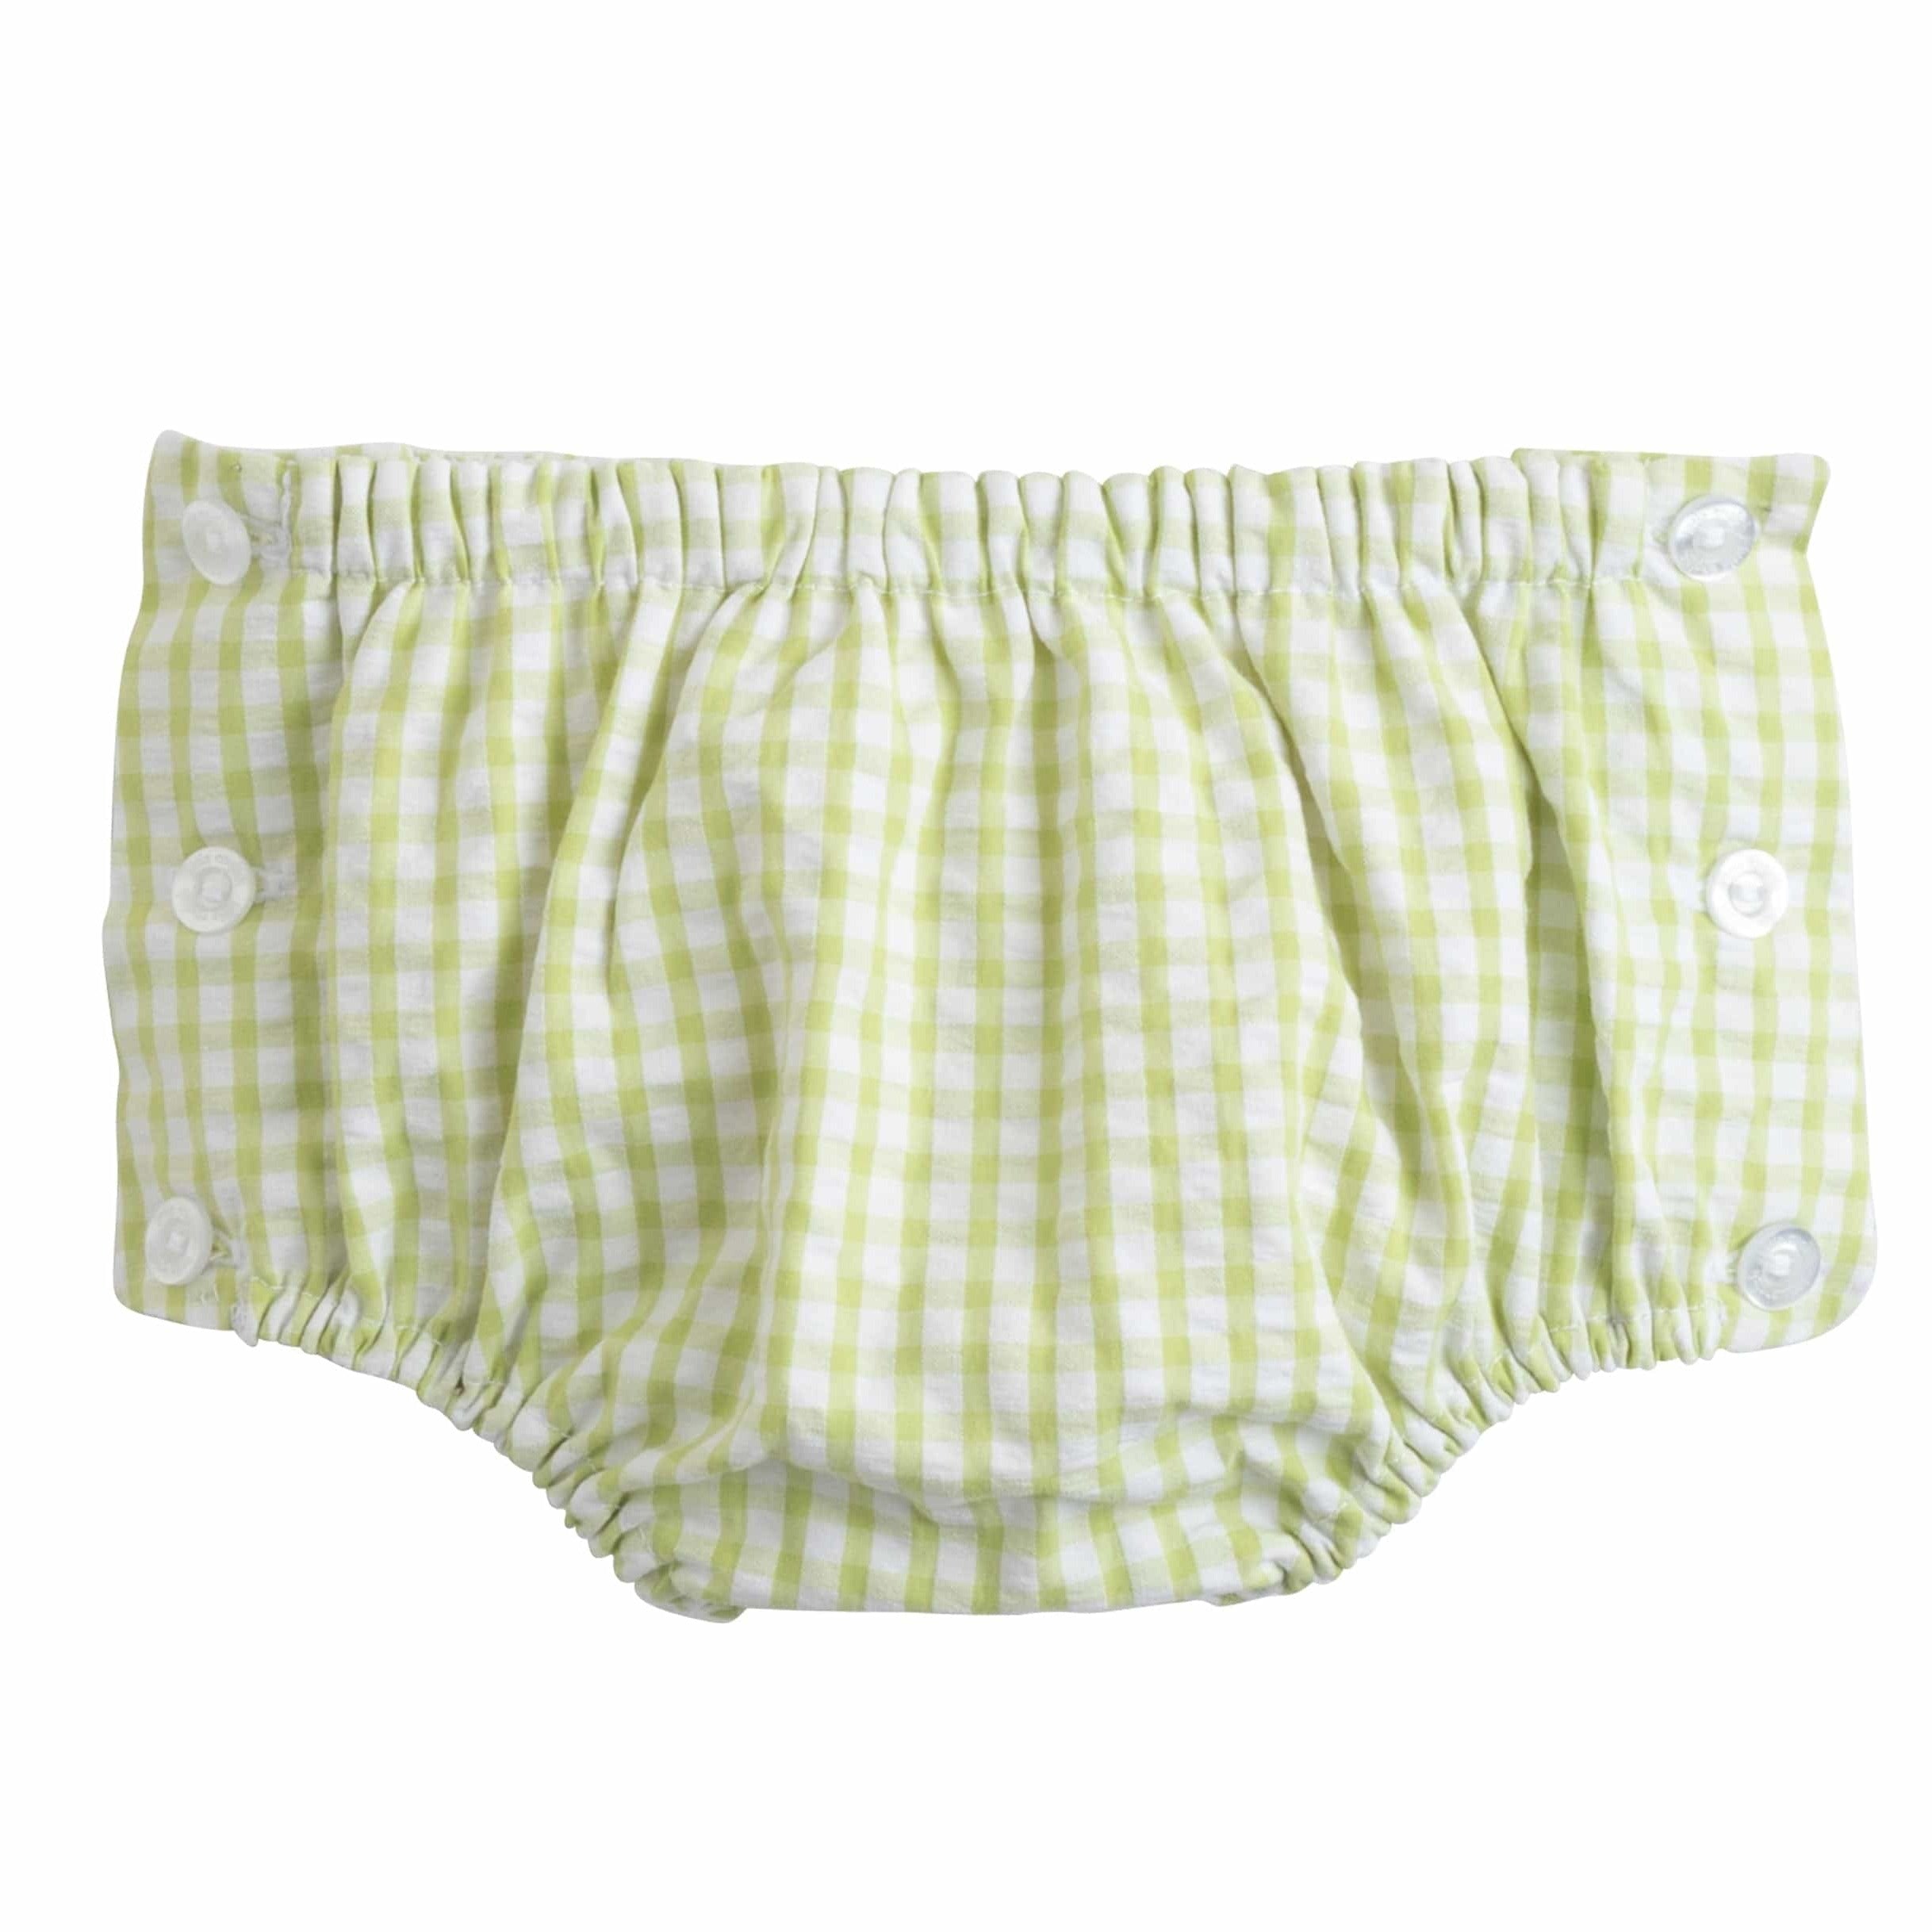 Frilly Knickers / jam pants / nappy covers with Lemon Yellow Bow